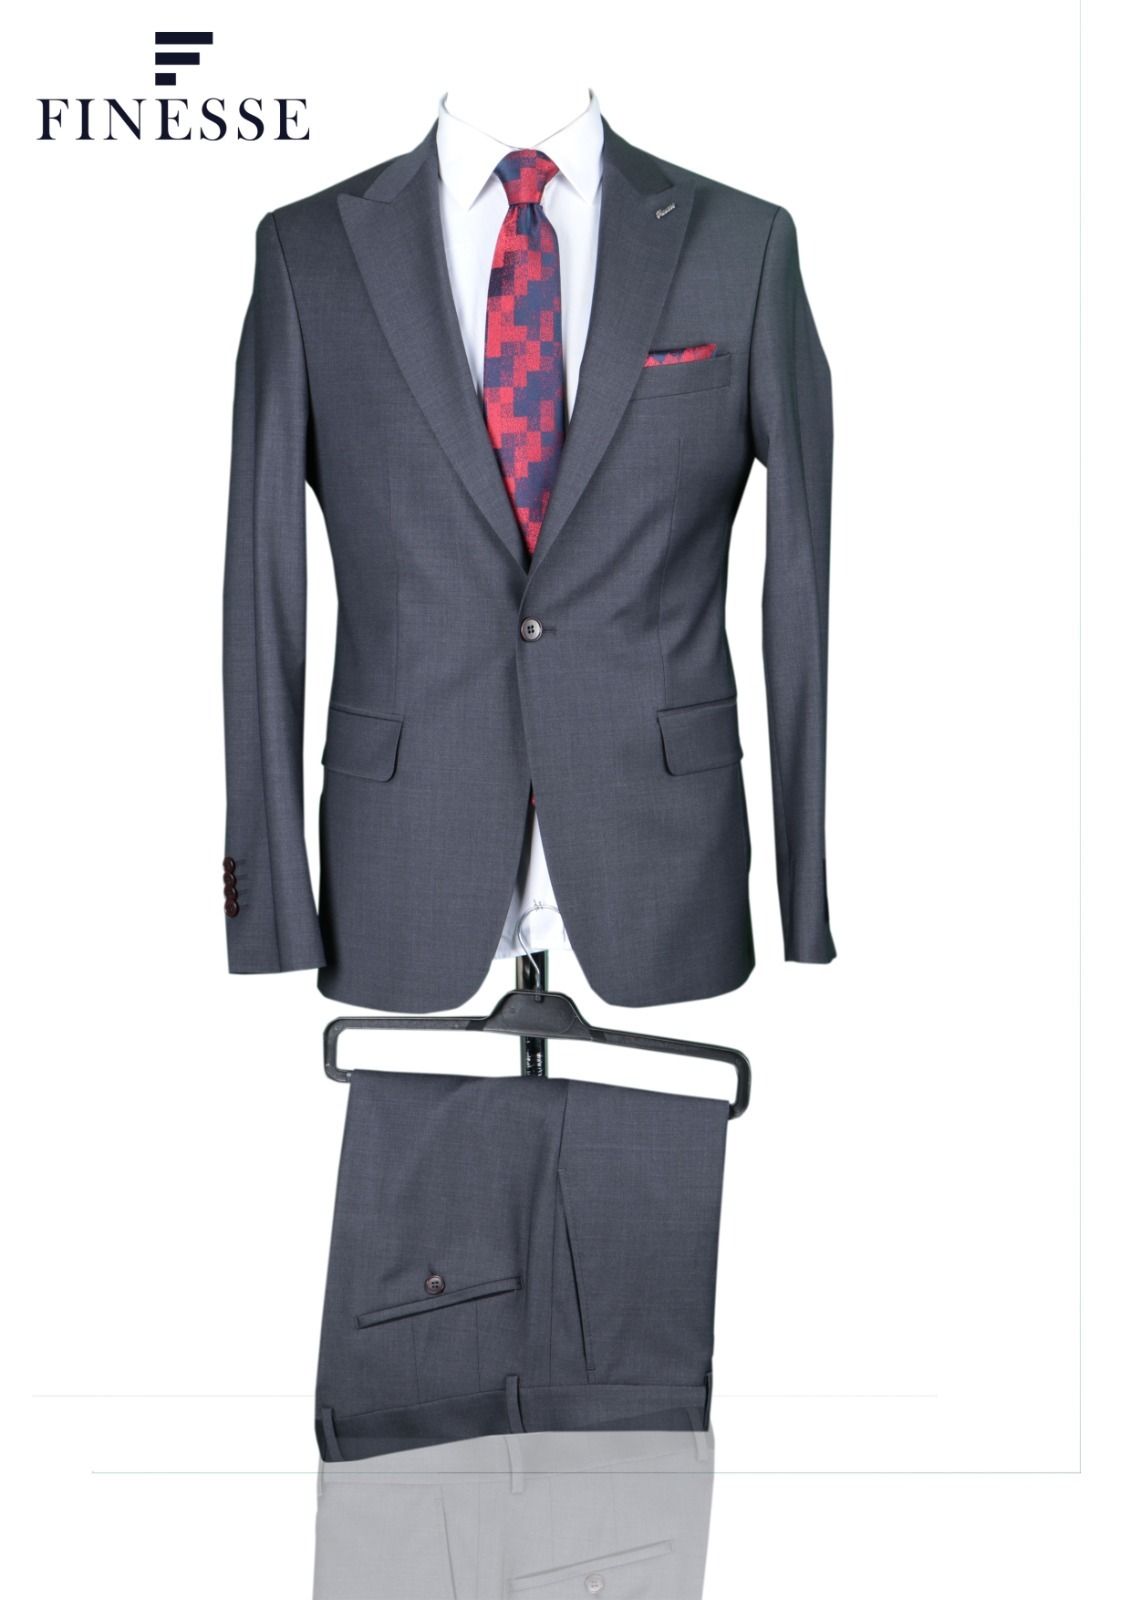 EXECUTIVE LIGHT GREY TURKEY SUIT WITH ONE BUTTON-deluxe.com.ng